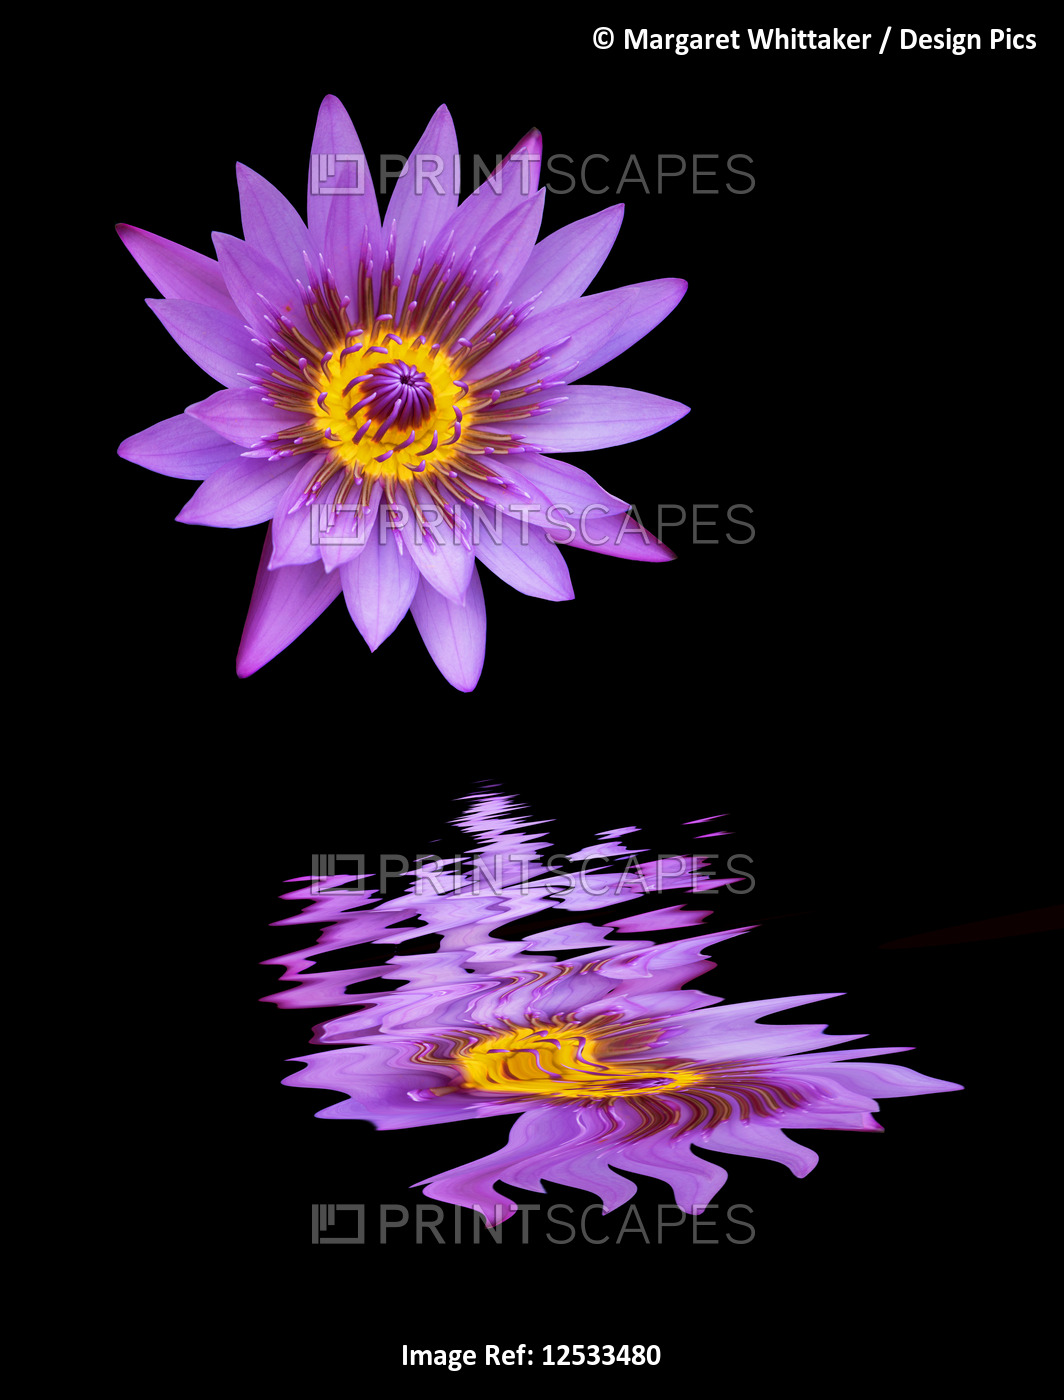 Vibrant purple flower reflected in water against a black background